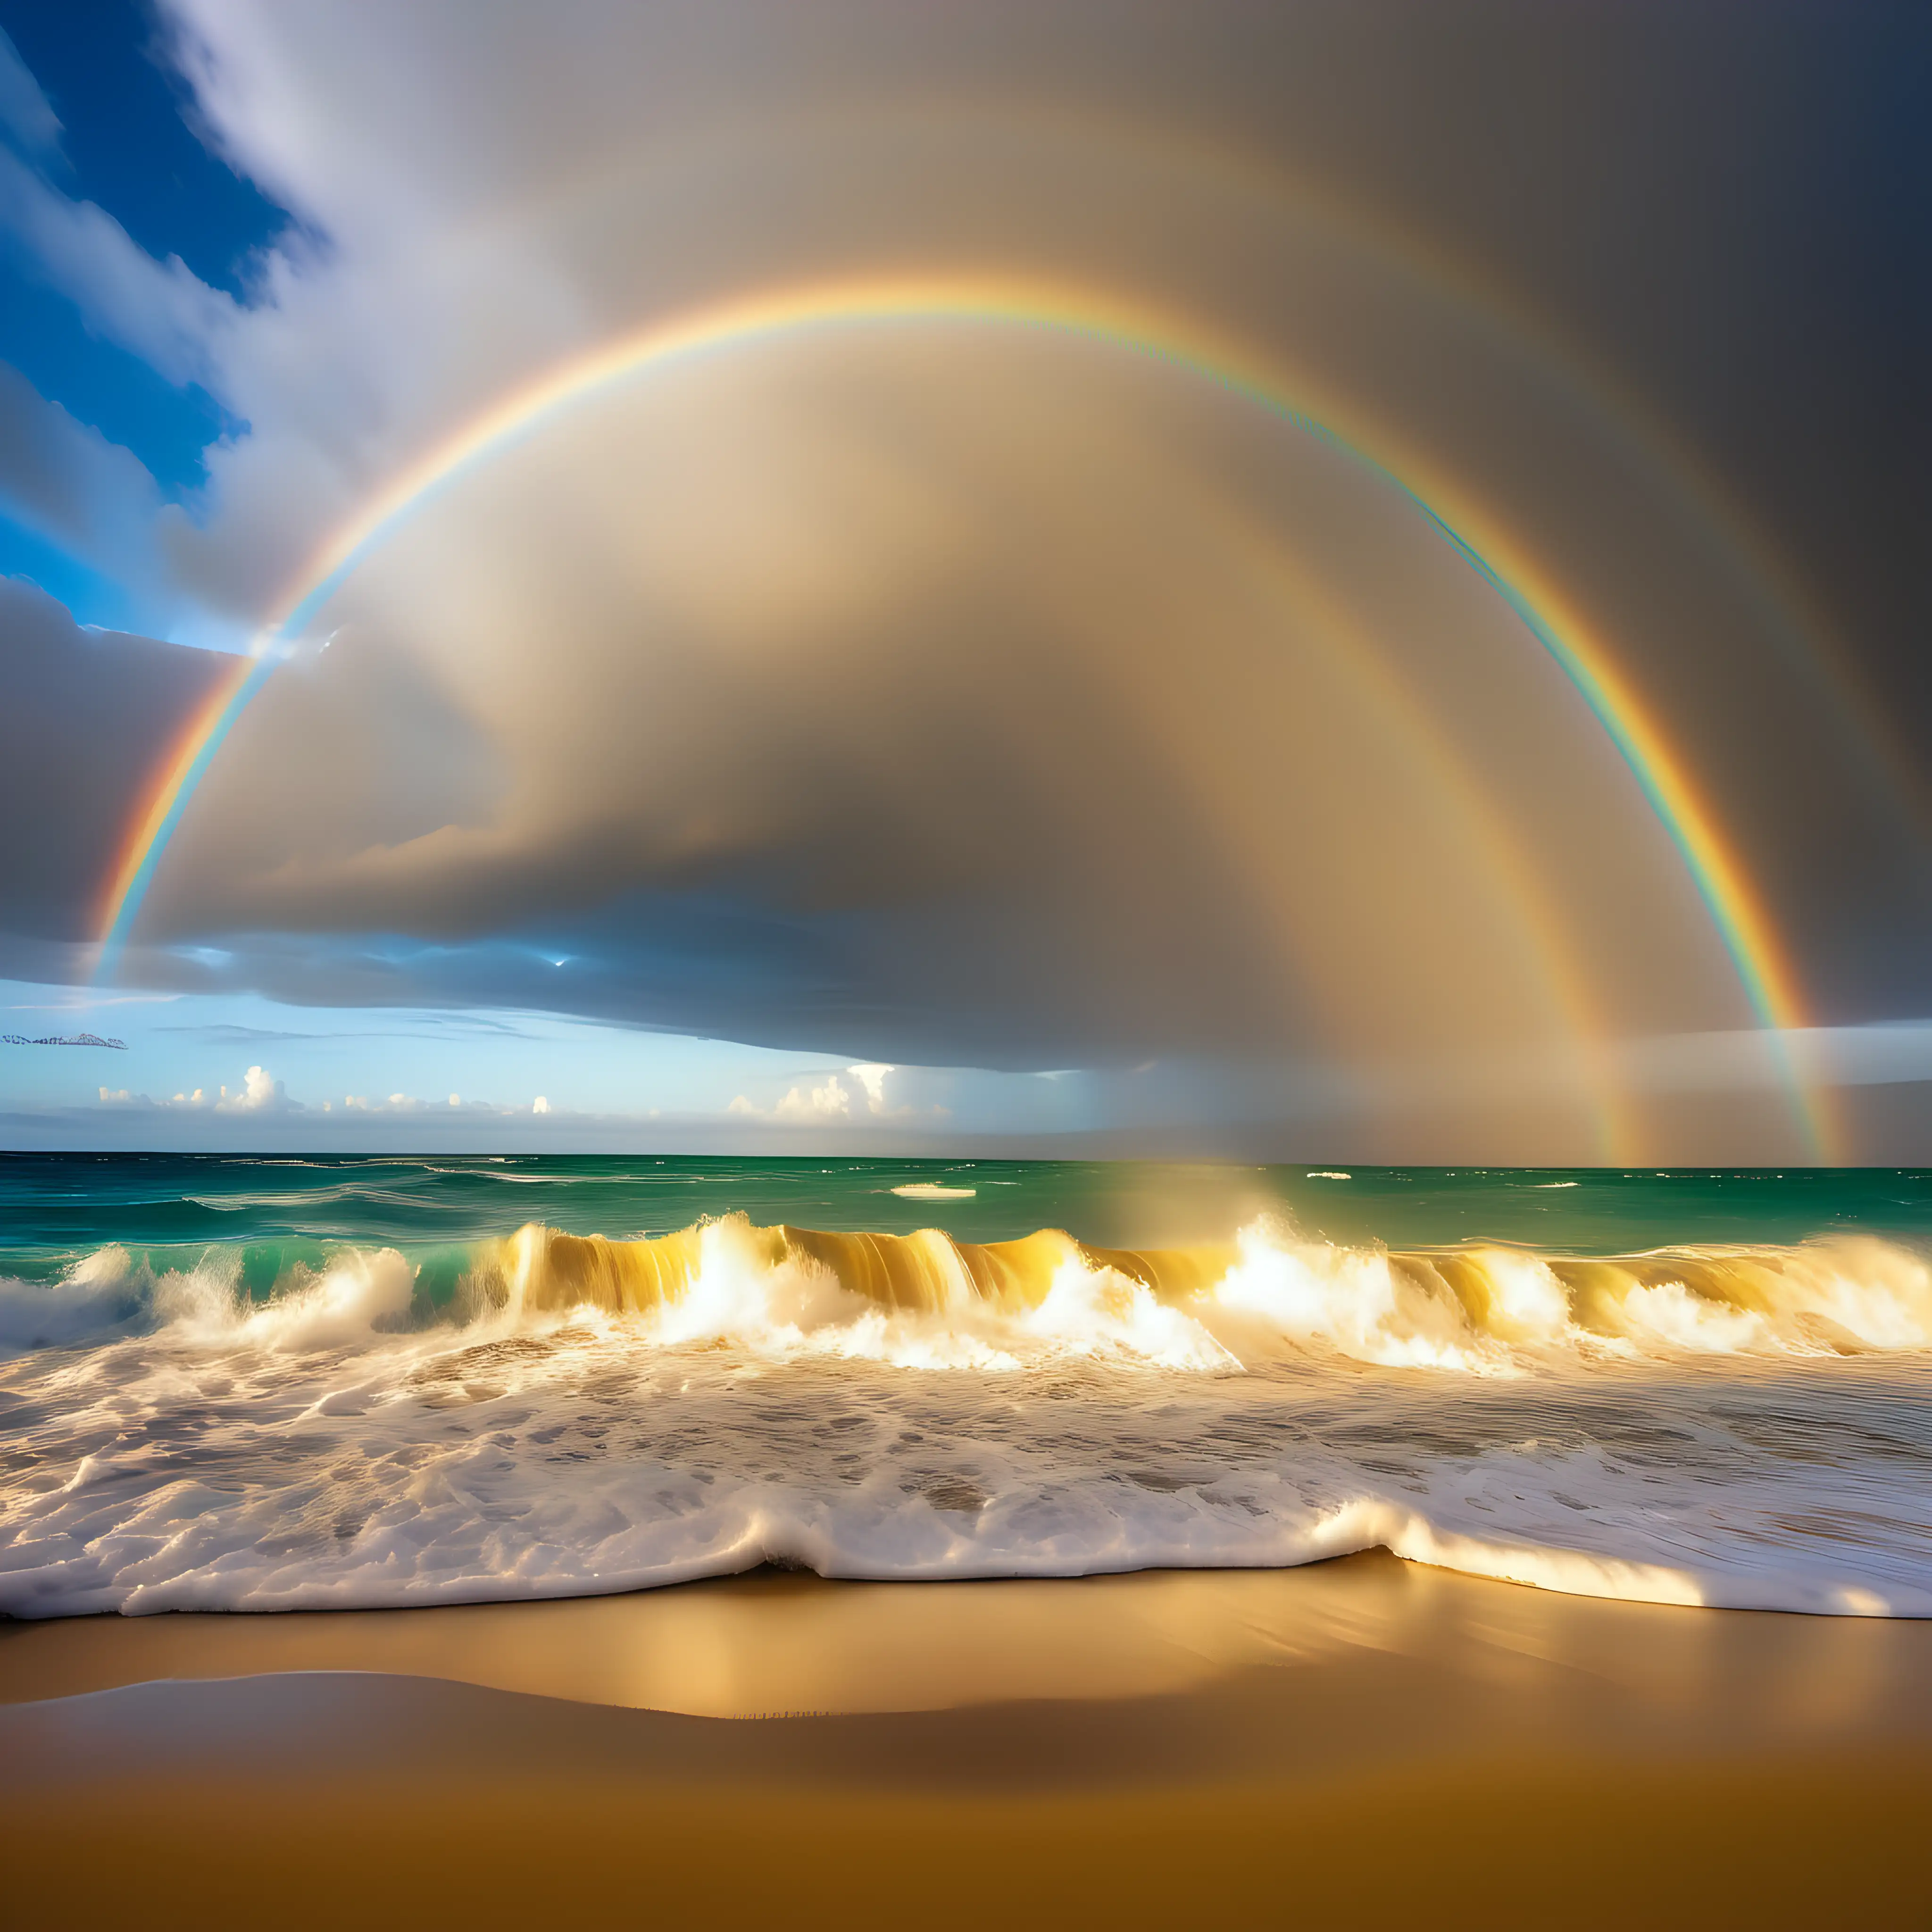 Colourful ocean scene with waves crashing onto a golden sand beach and a rare rainbow cloud formation above